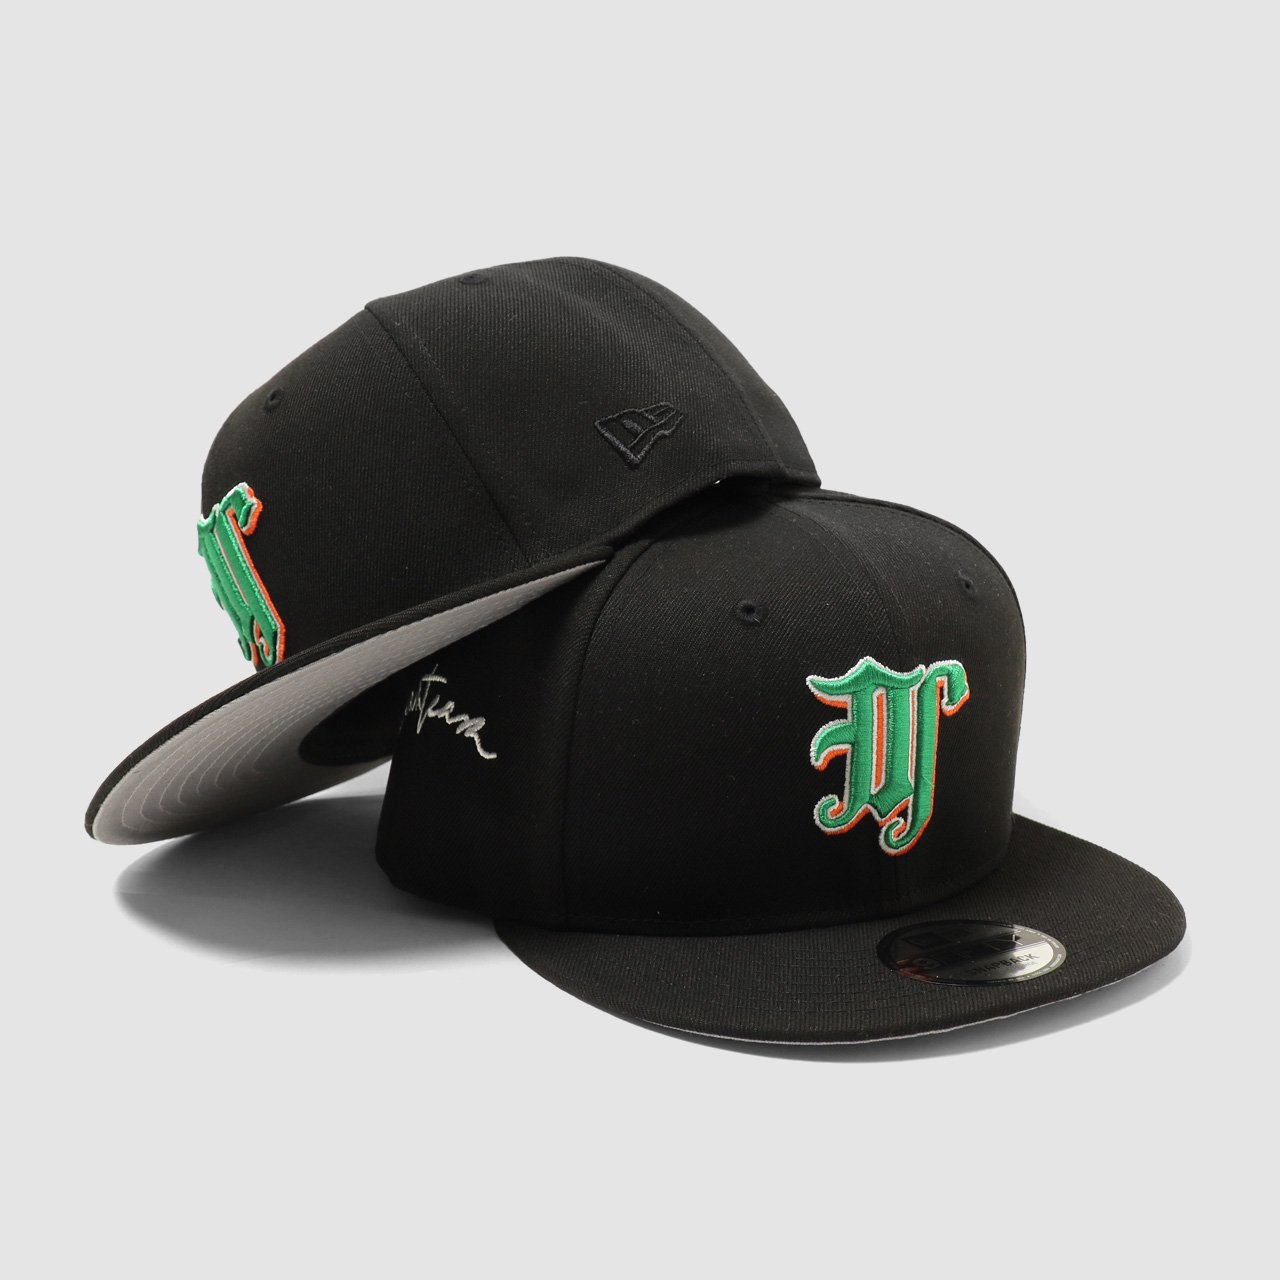 <img class='new_mark_img1' src='https://img.shop-pro.jp/img/new/icons35.gif' style='border:none;display:inline;margin:0px;padding:0px;width:auto;' />DT Old Logo New Era 9Fifty Snapback Cap [Script Logo]